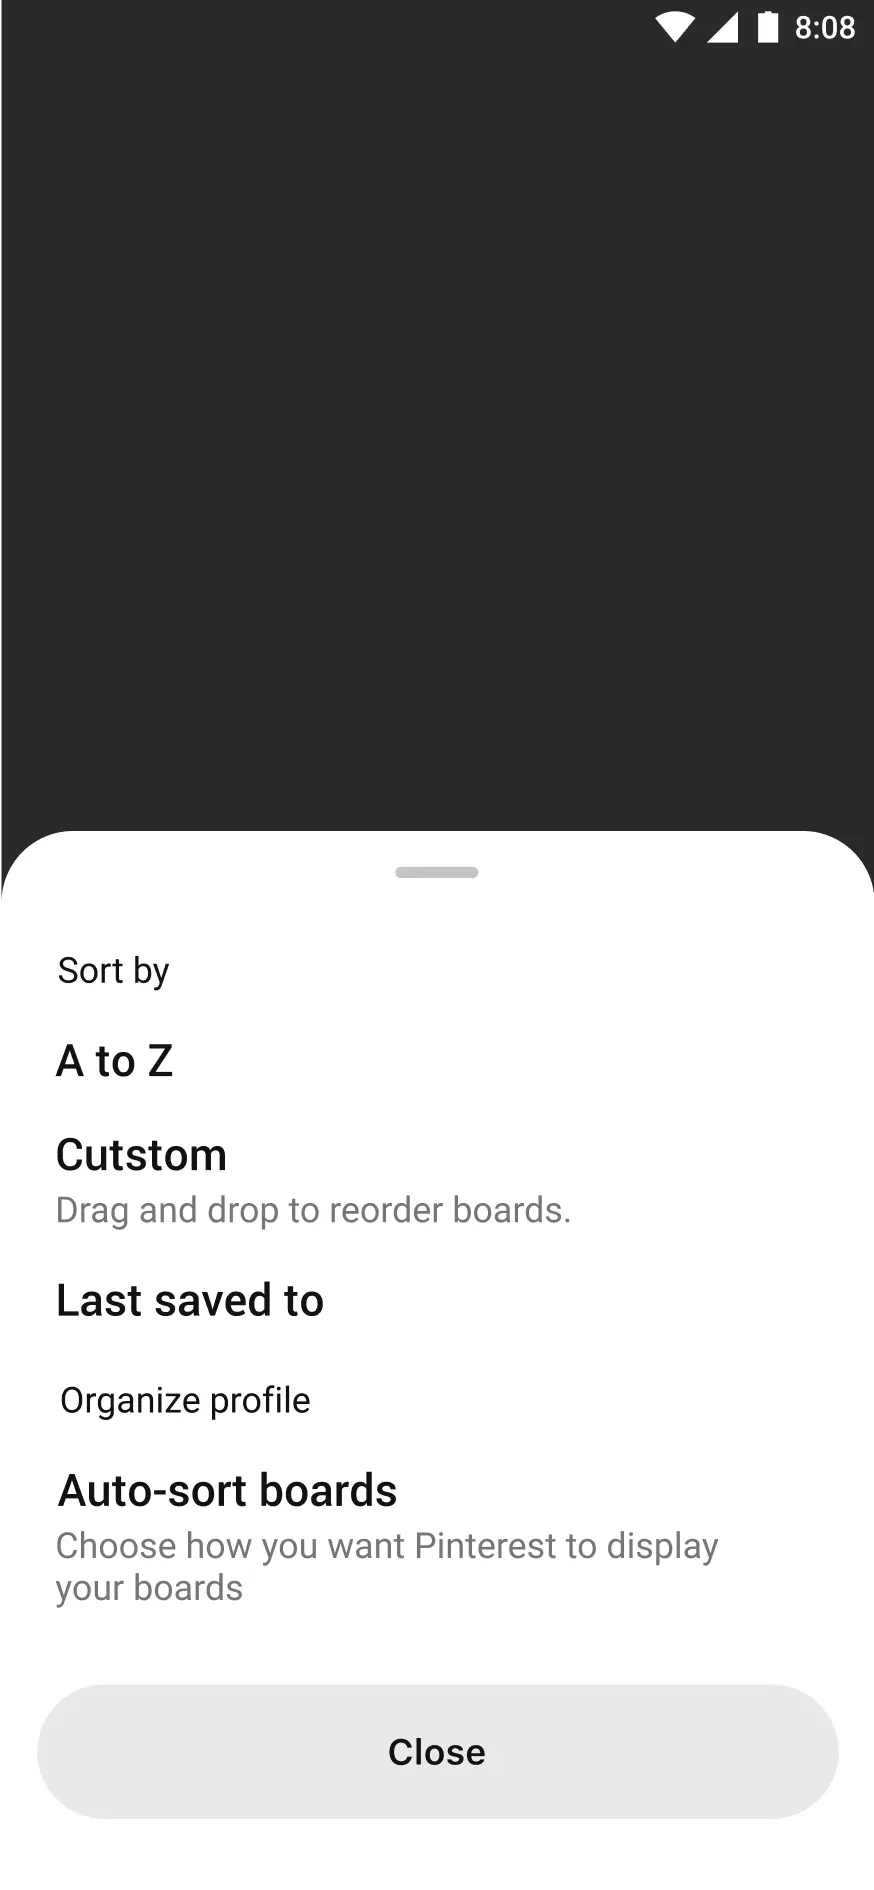 An Action Sheet that allows for sorting and organization